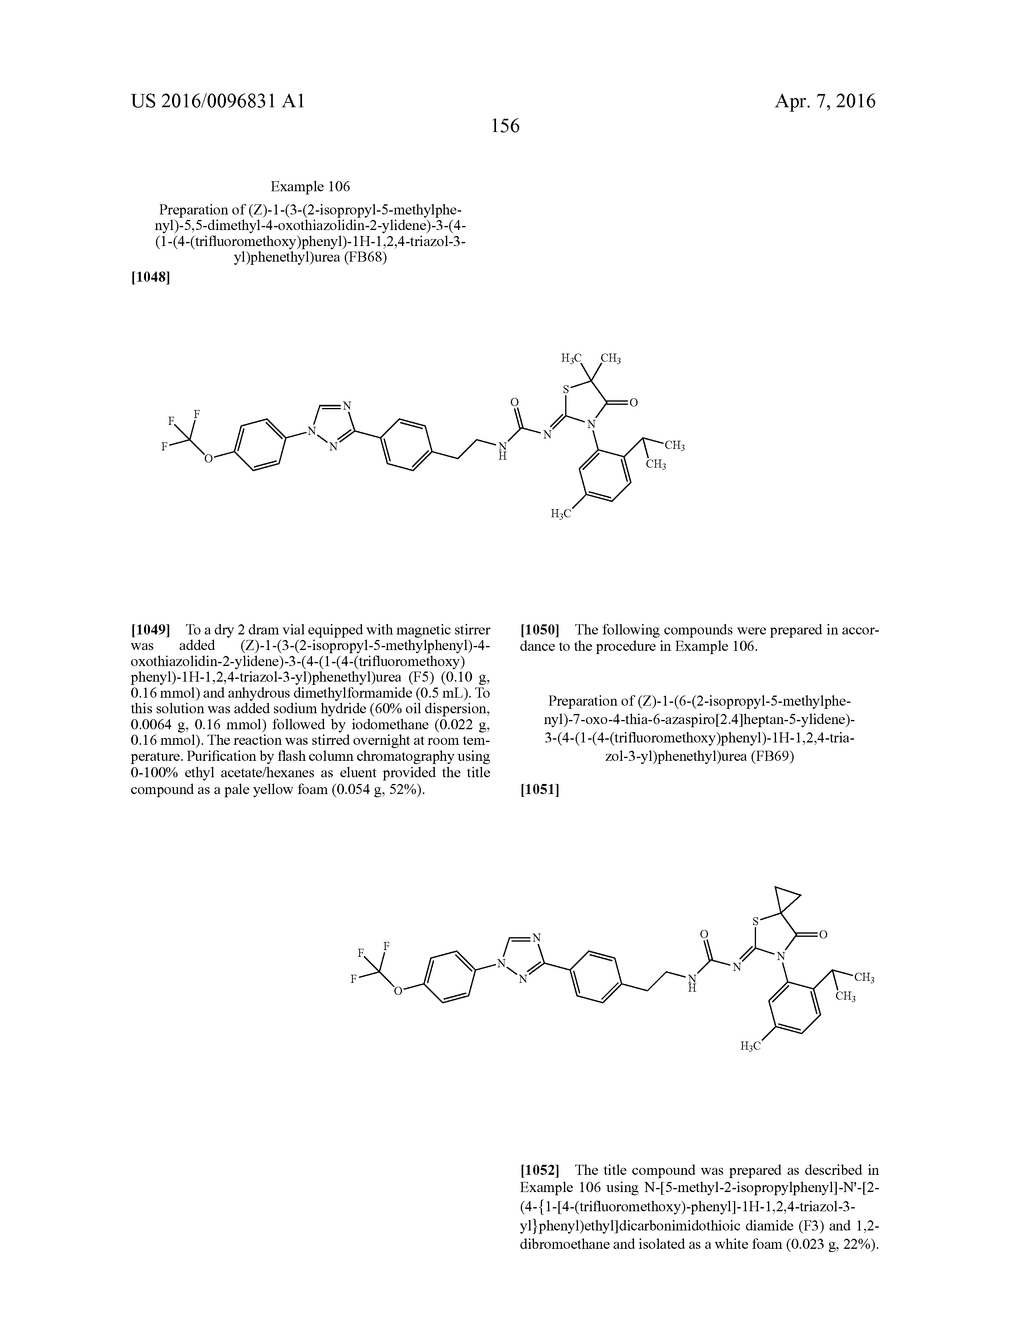 MOLECULES HAVING CERTAIN PESTICIDAL UTILITIES, AND INTERMEDIATES,     COMPOSITIONS, AND PROCESSES RELATED THERETO - diagram, schematic, and image 157